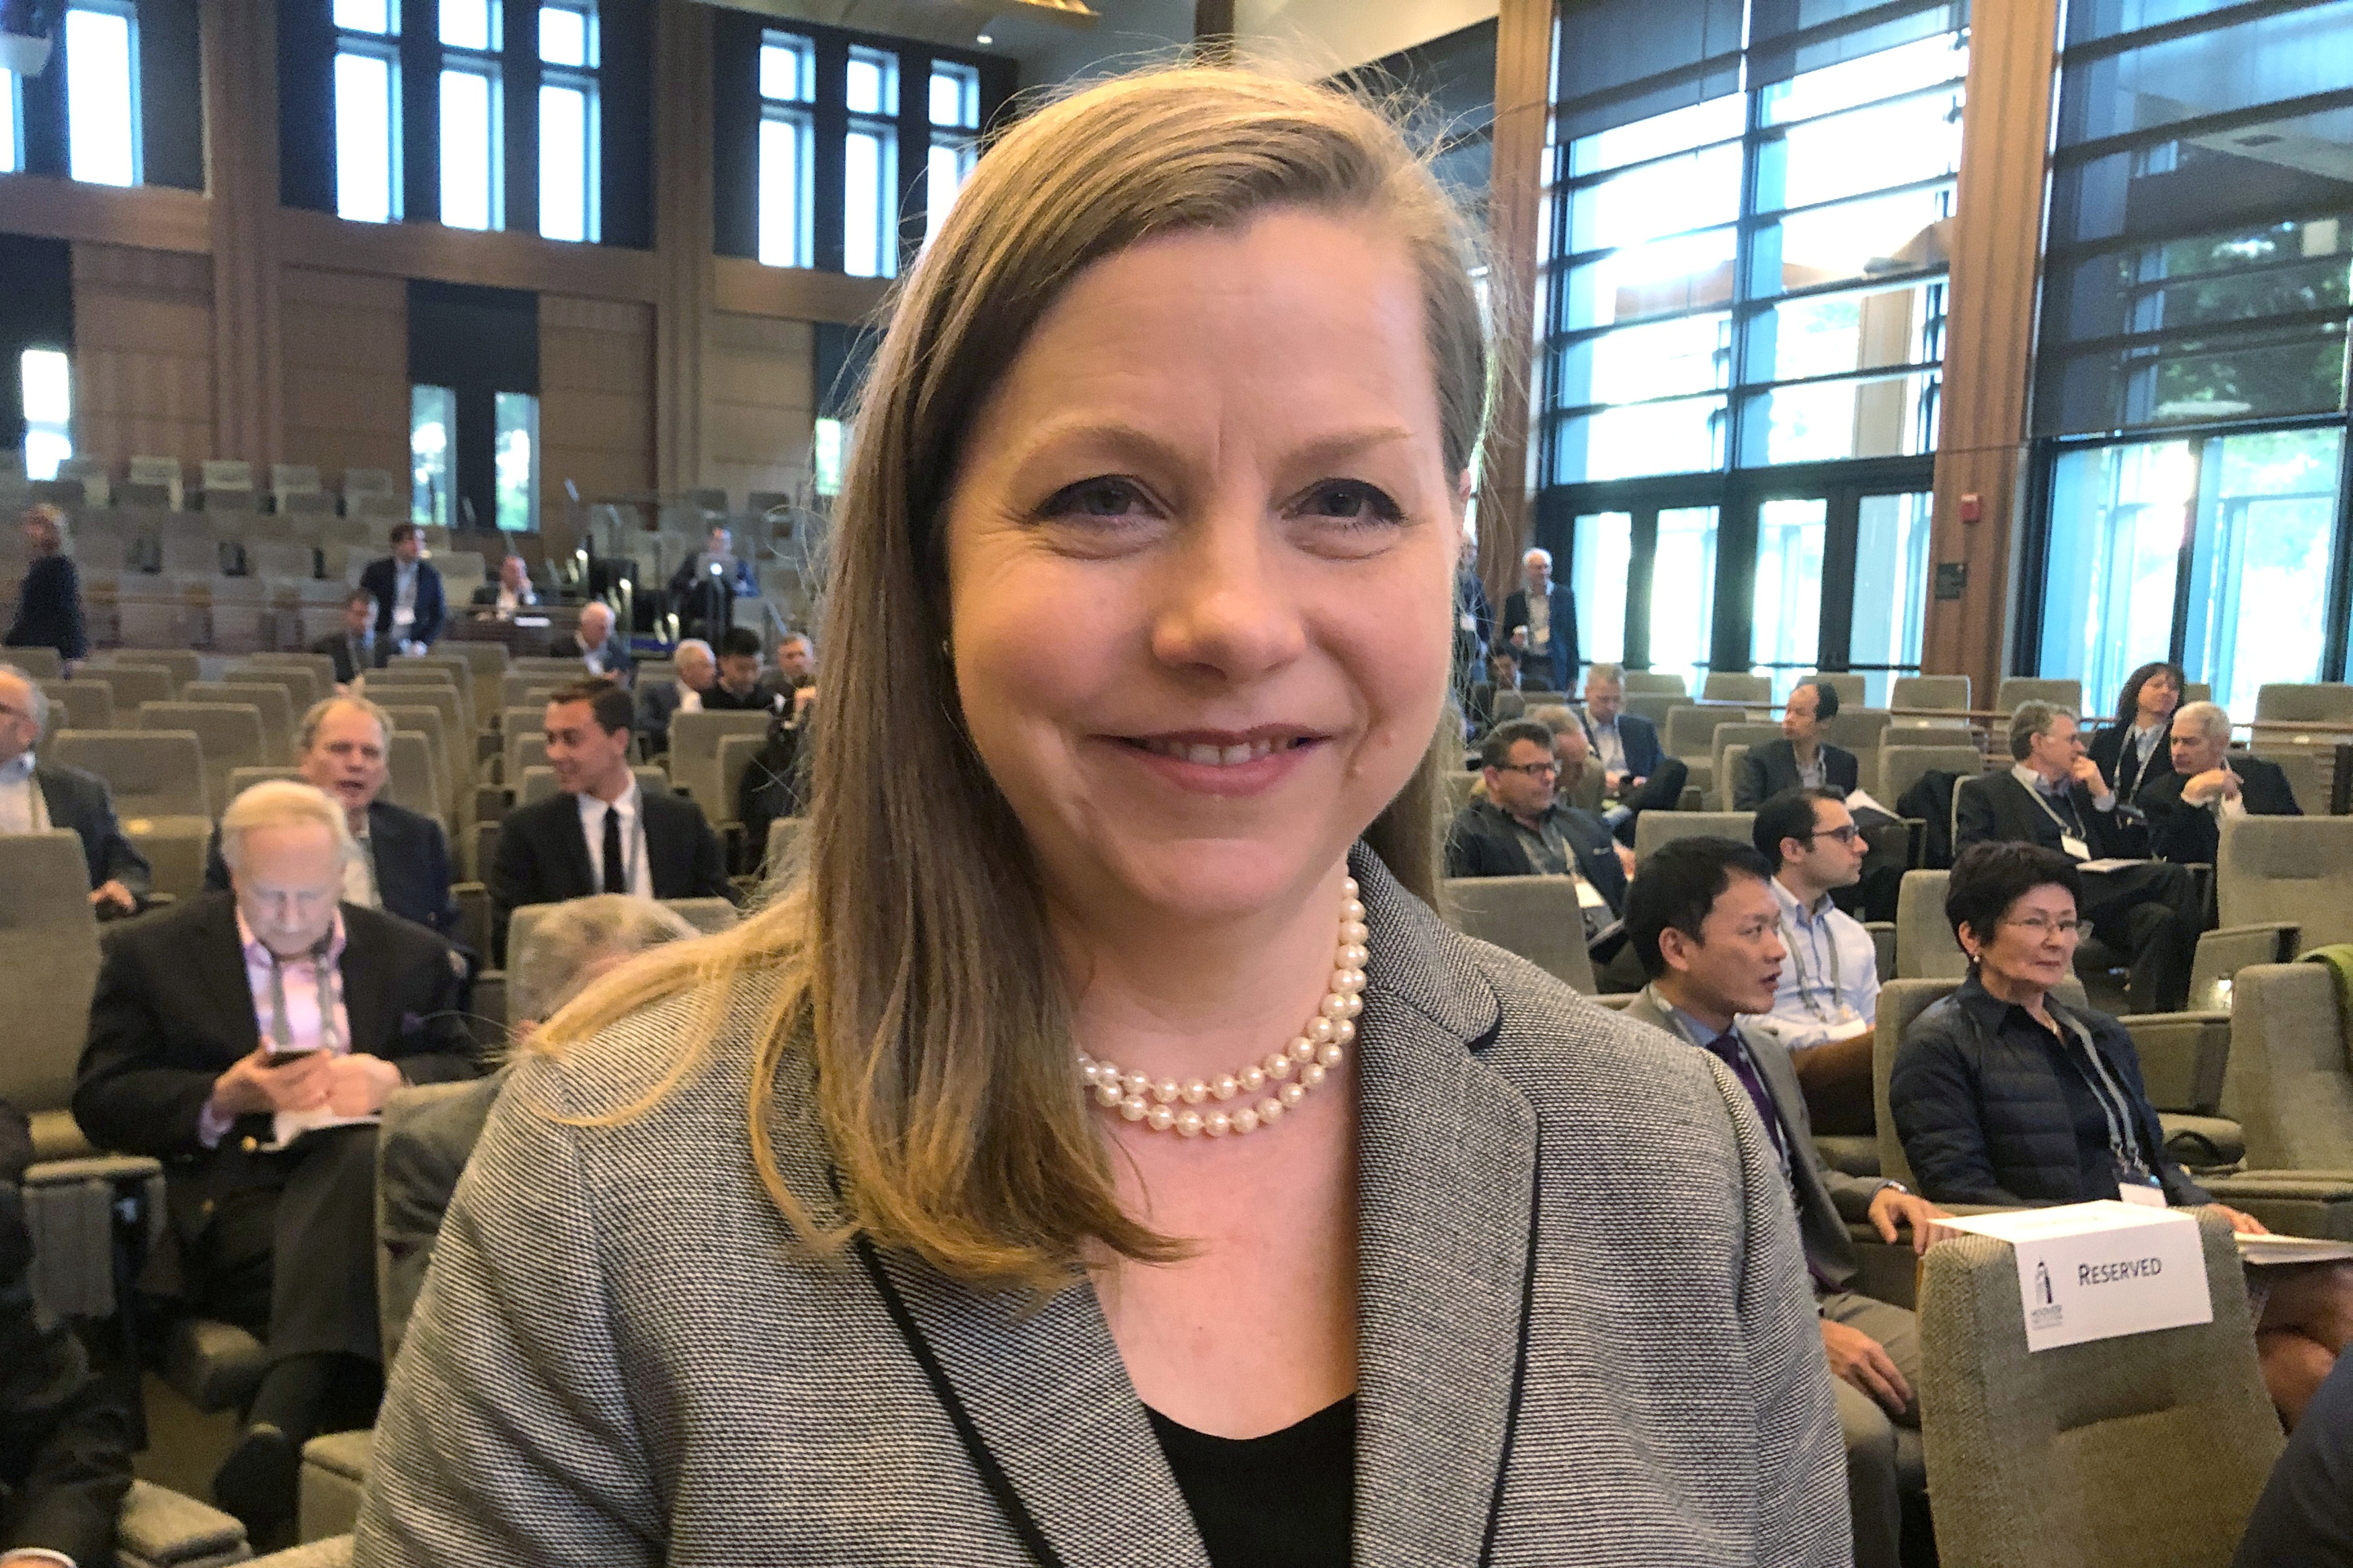 Federal Reserve Board Governor Michelle Bowman at a conference on monetary policy at The Hoover Institution in Palo Alto